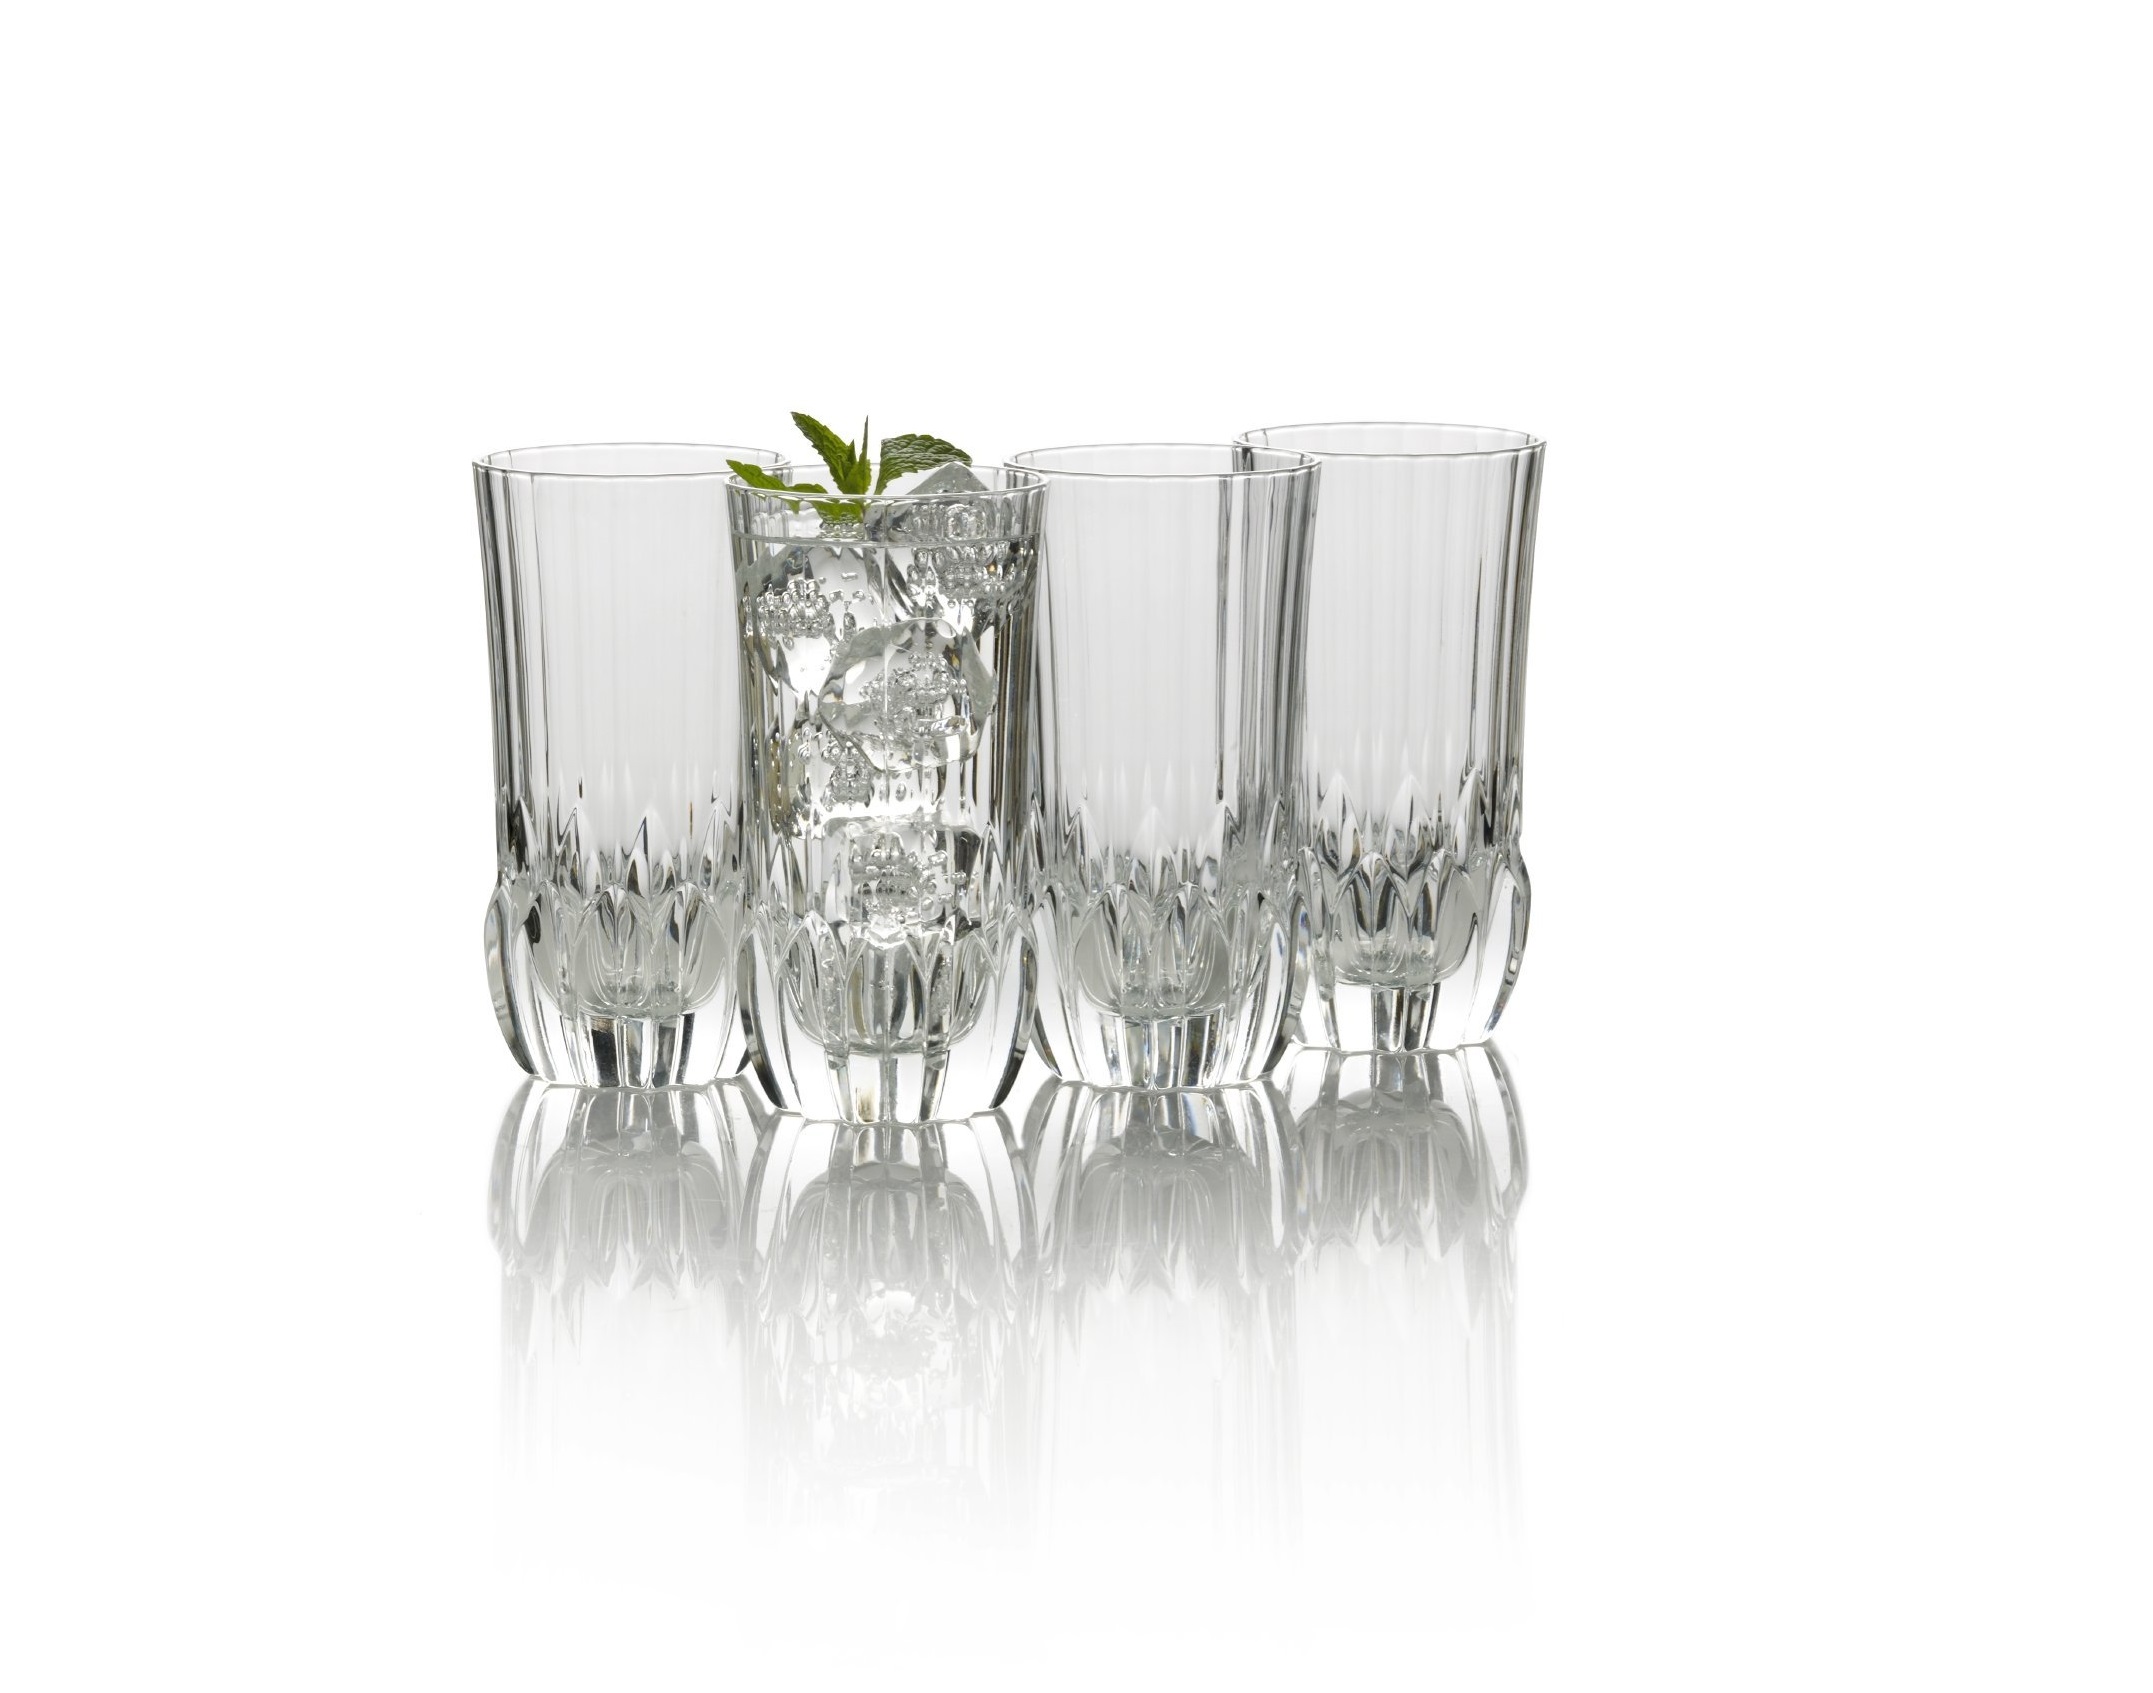 https://cdn11.bigcommerce.com/s-9mnzpxwffi/images/stencil/original/products/390/2205/Faceted_Crystal_Highball_Glasses_Drinkware_Set_of_4__63473.1632197443.jpg?c=2